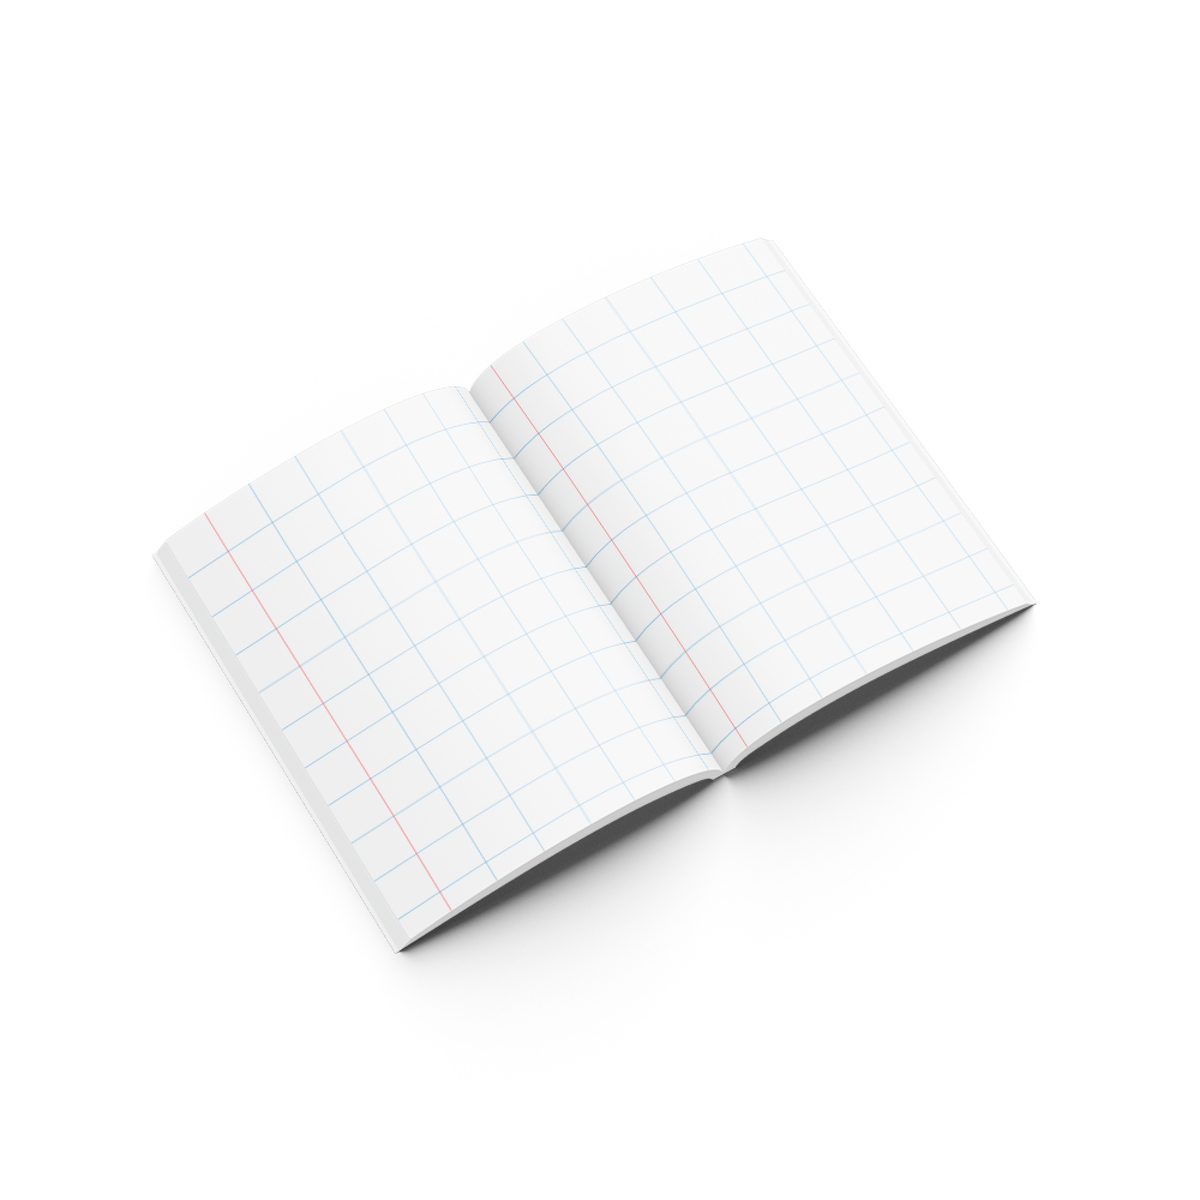 PSI Exercise Book 20mm Square 100 Pages 20M100